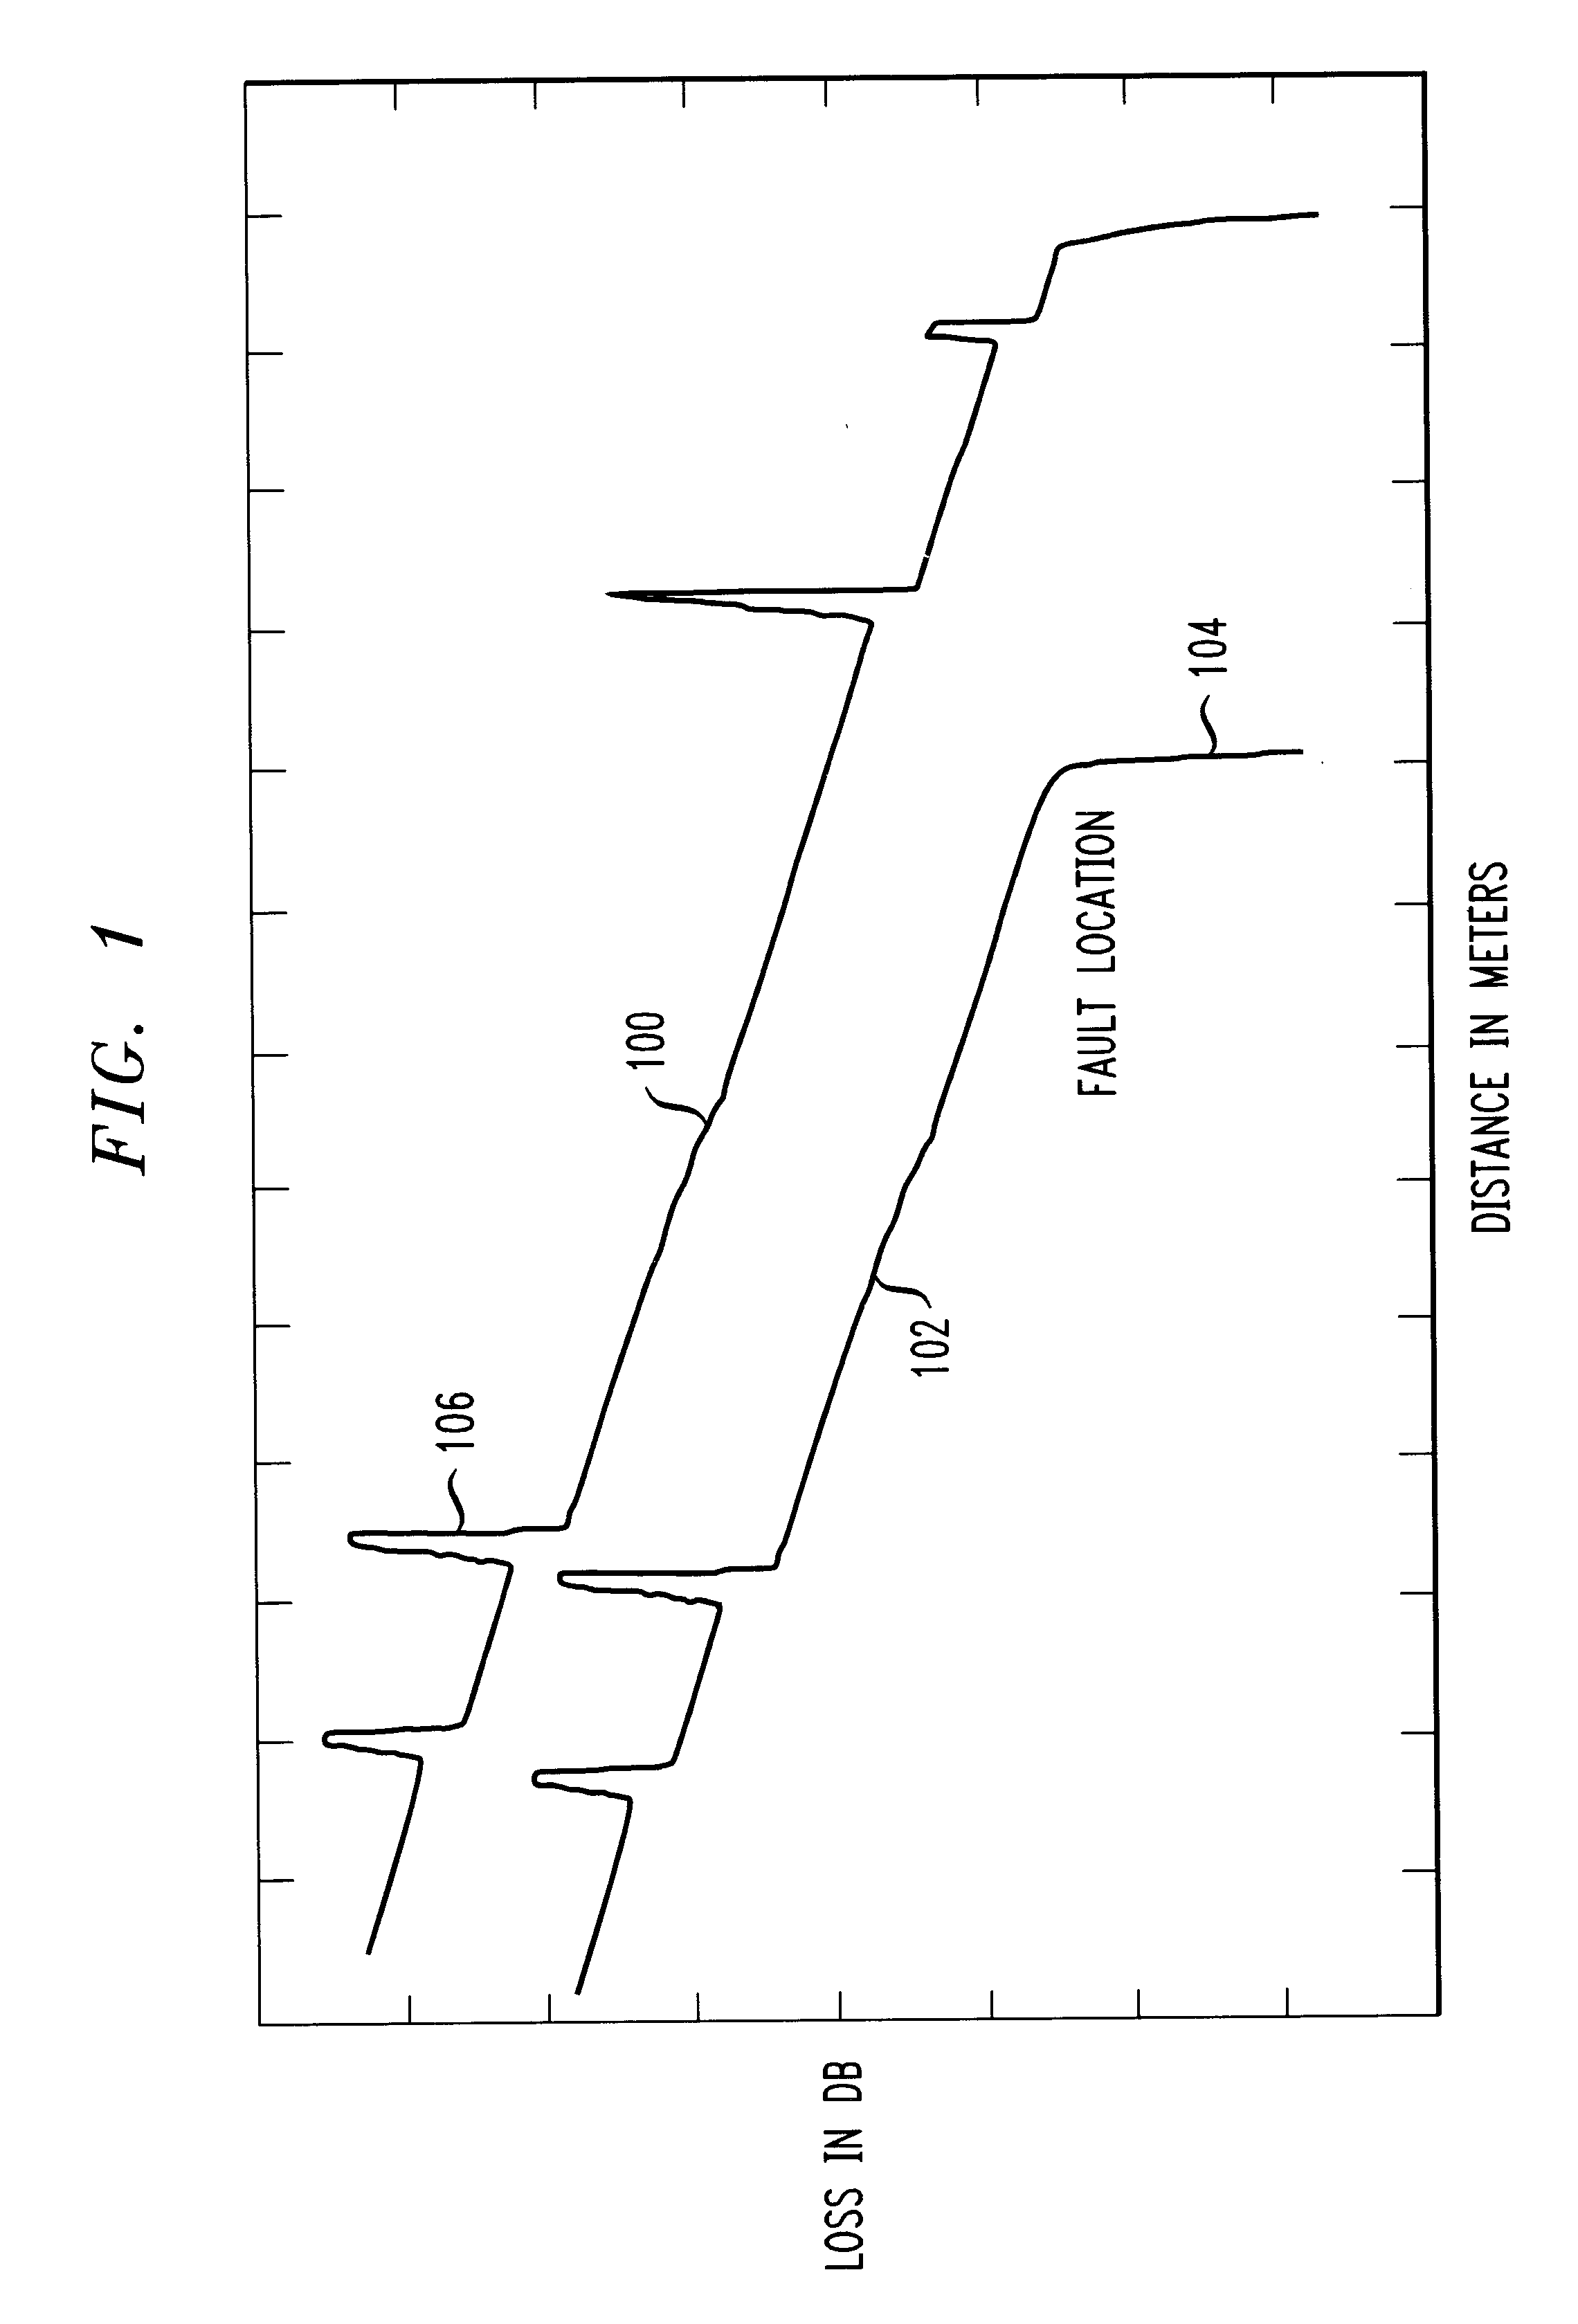 Method and apparatus for optical time domain reflectometry (OTDR) analysis